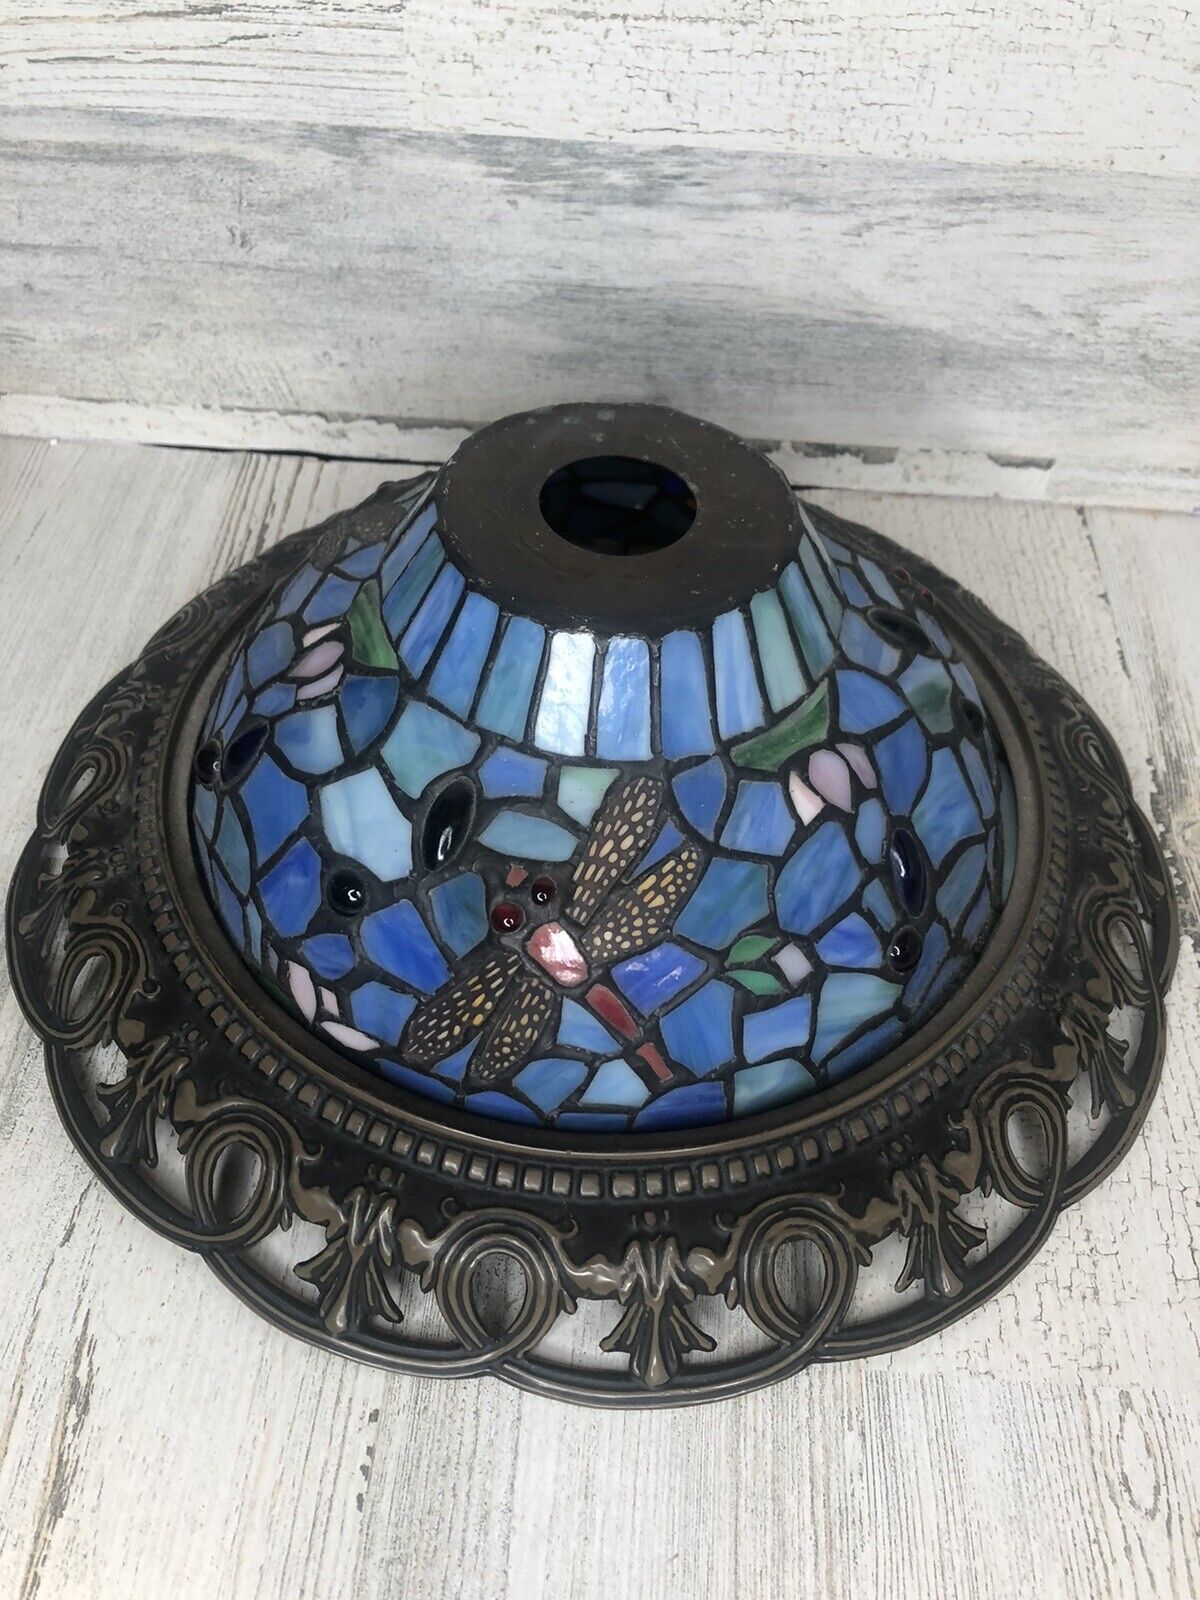 Dragonfly Tiffany Style Stained Glass Lamp Shade Table Floor or Hanging